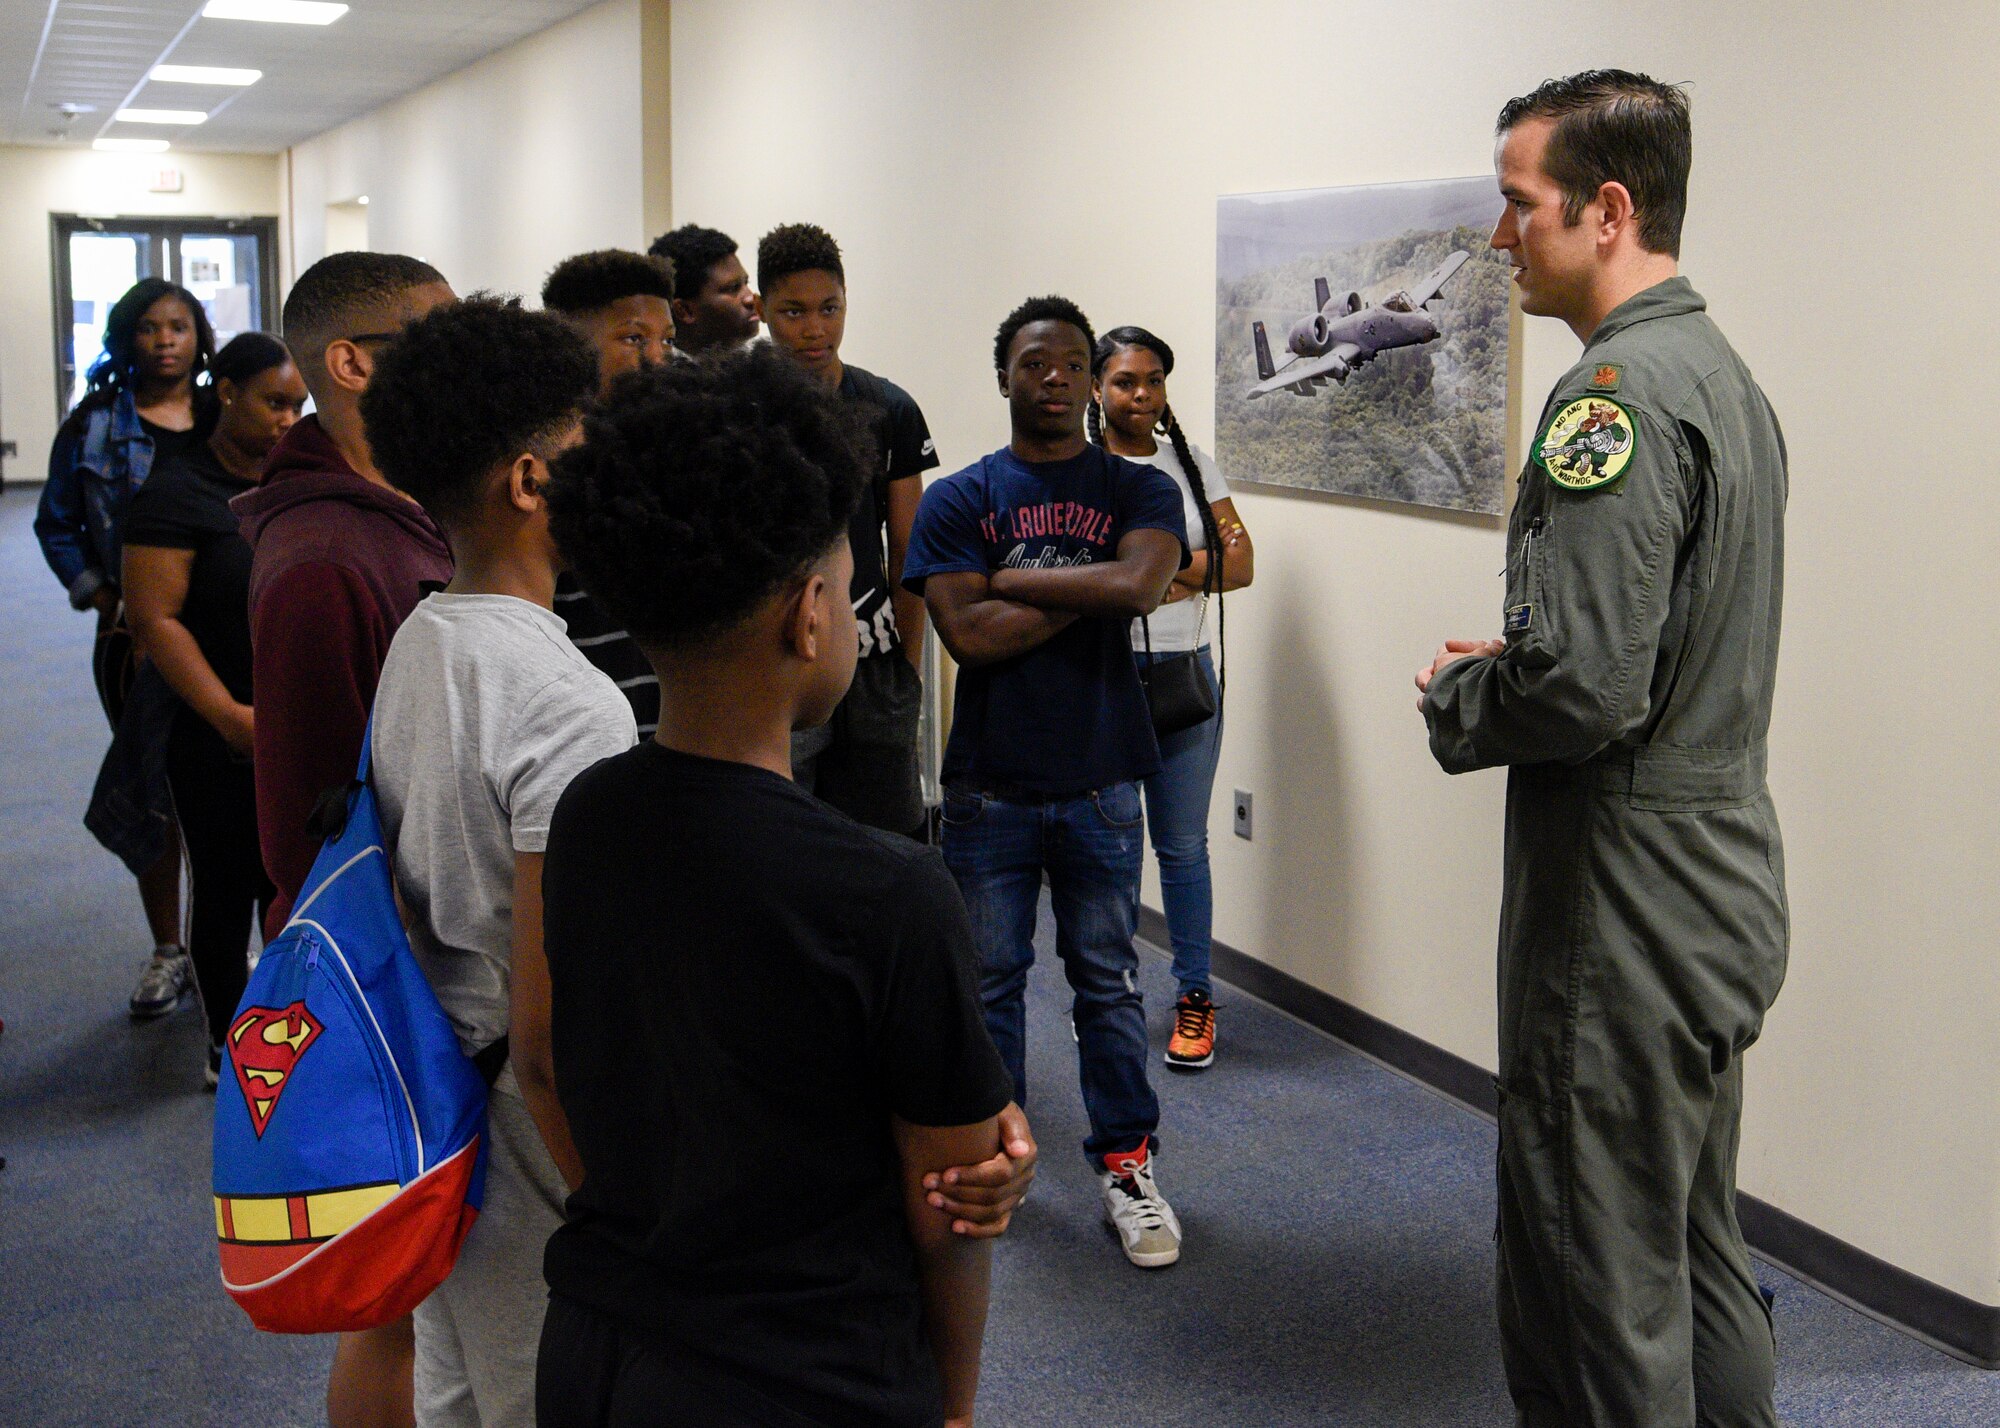 Members of the 175th Wing, Maryland Air National Guard, hosted a group students from the Baltimore City Department of Recreation and Parks Science, Technology, Engineering and Math program, July 3, 2019, at Martin State Airport, Middle River, Md. Students from schools across Baltimore City had the opportunity to ask questions and interact with personnel from the 104th Fighter Squadron, 175th Aircraft Maintenance Squadron and 135th Intelligence Squadron. (U.S. Air National Guard photo by Staff Sgt. Enjoli Saunders)